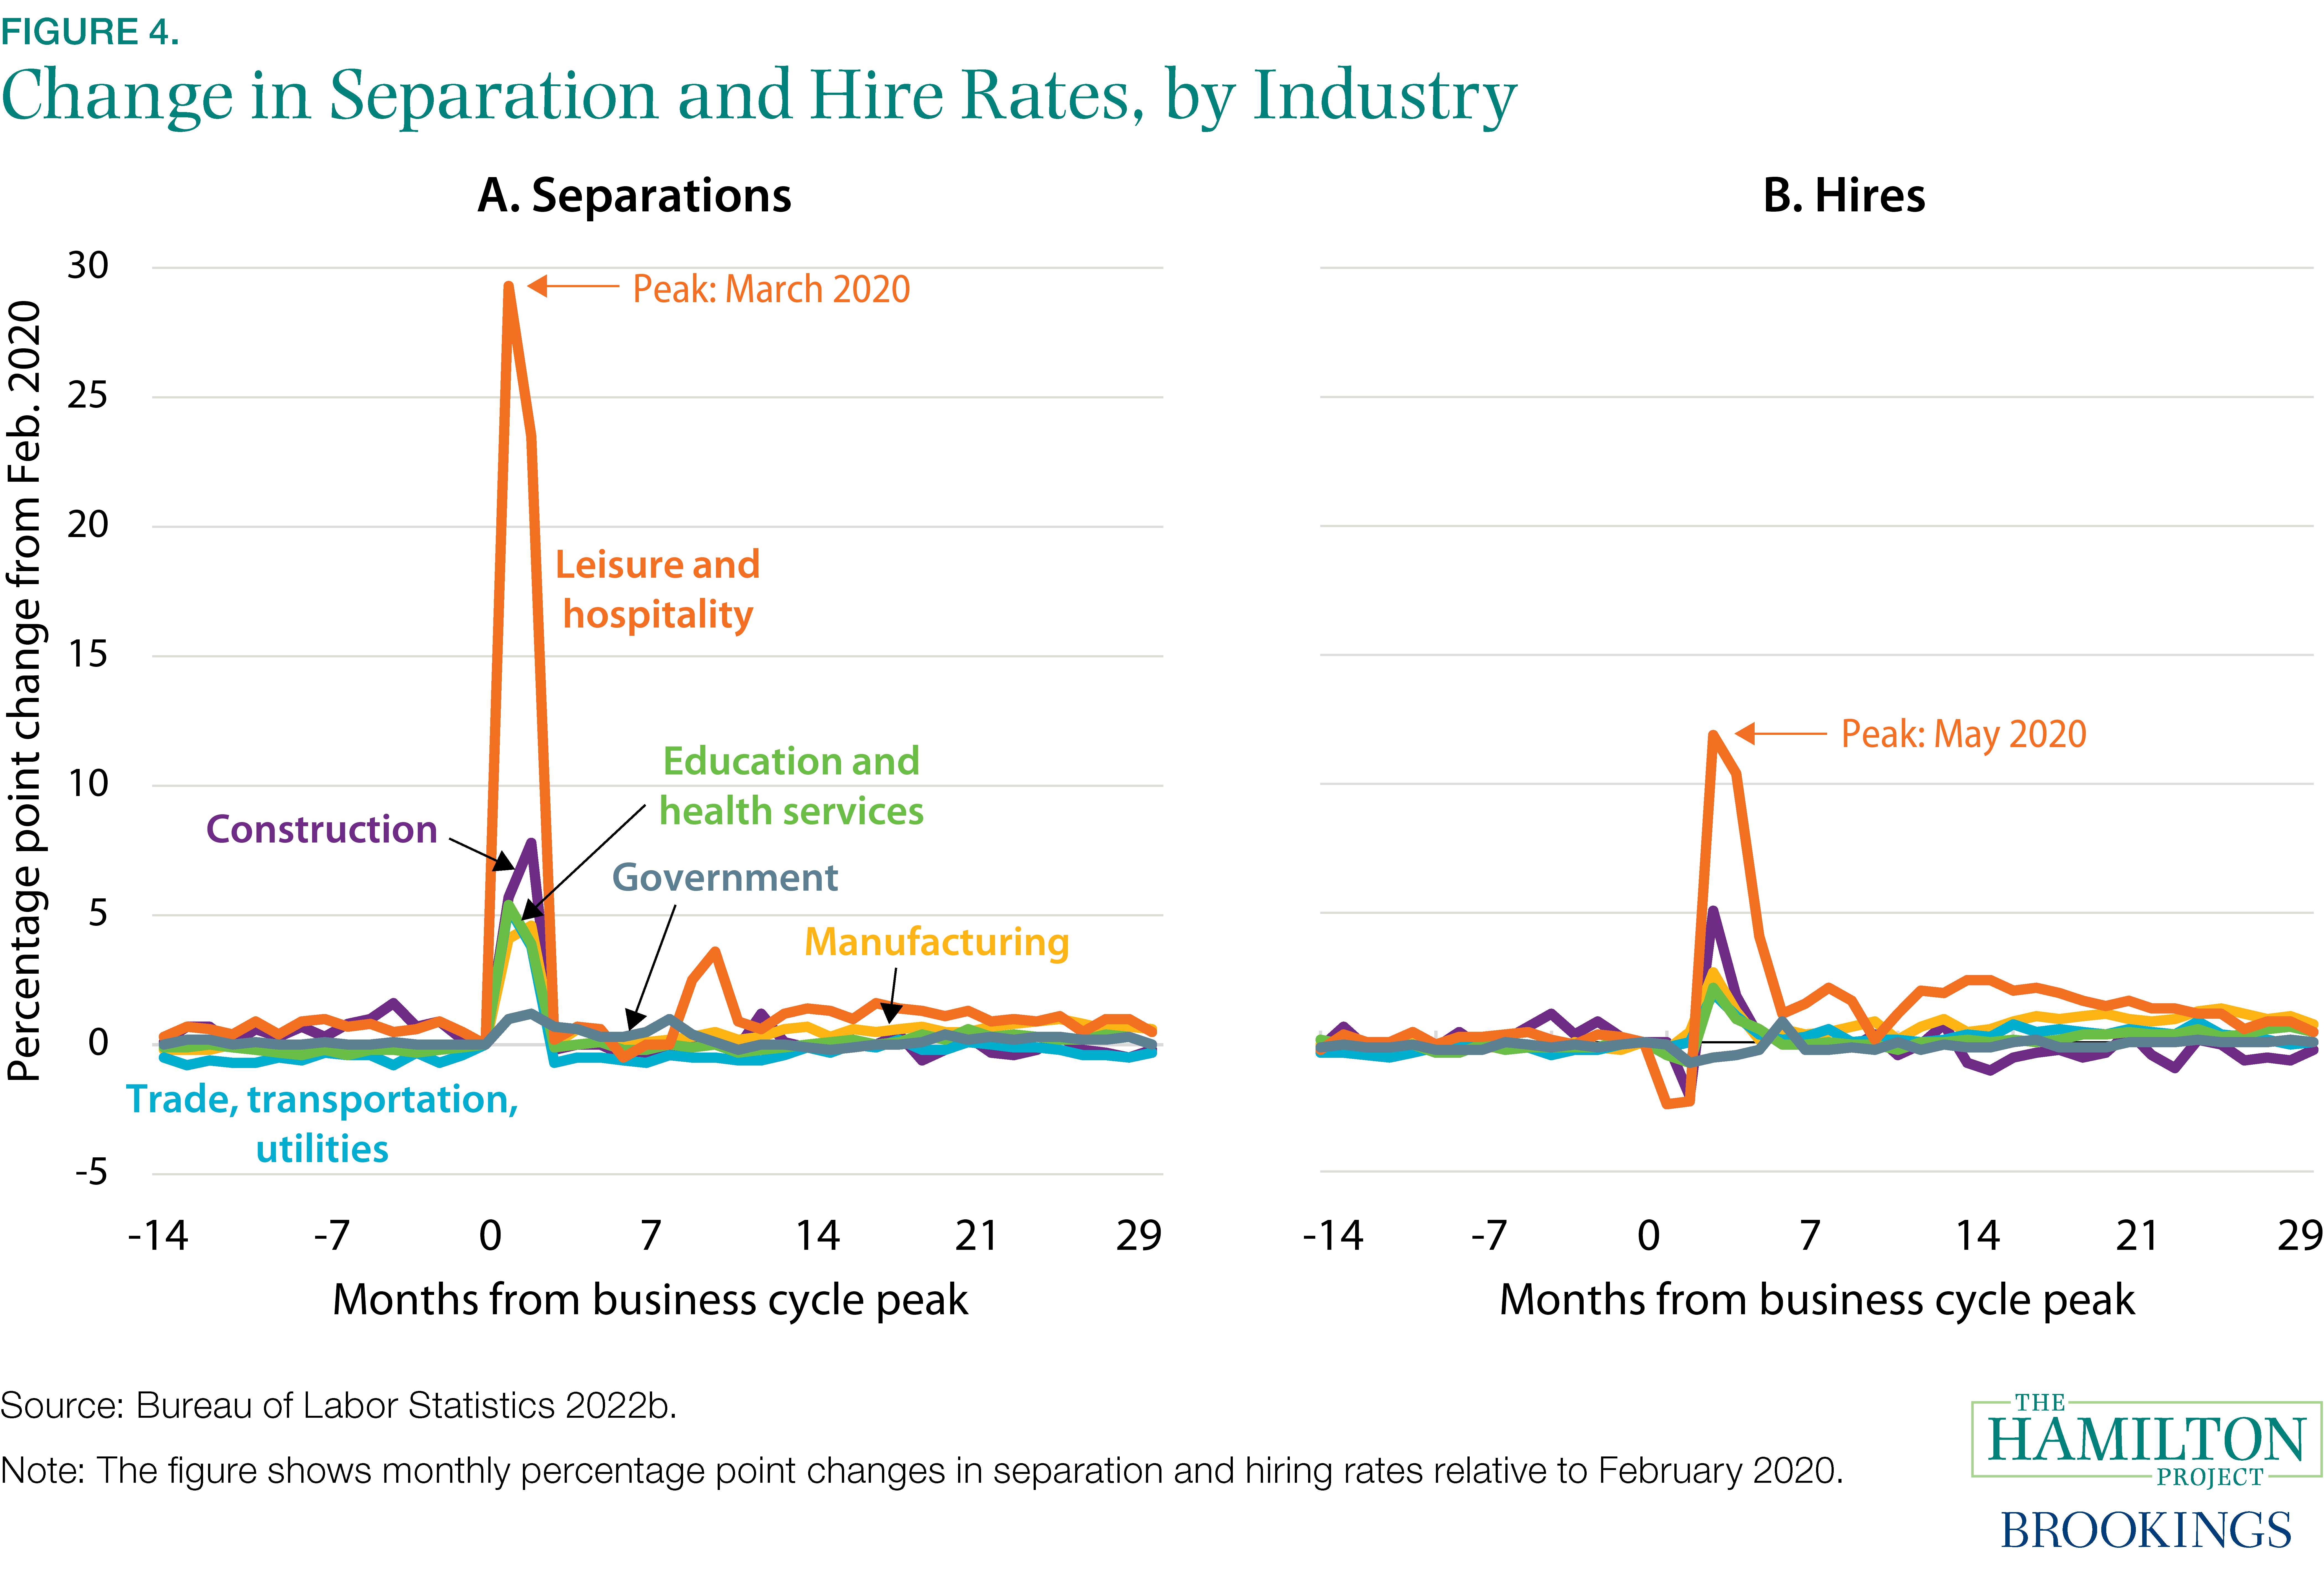 Figure 4. Change in Separation and Hire Rates, by Industry